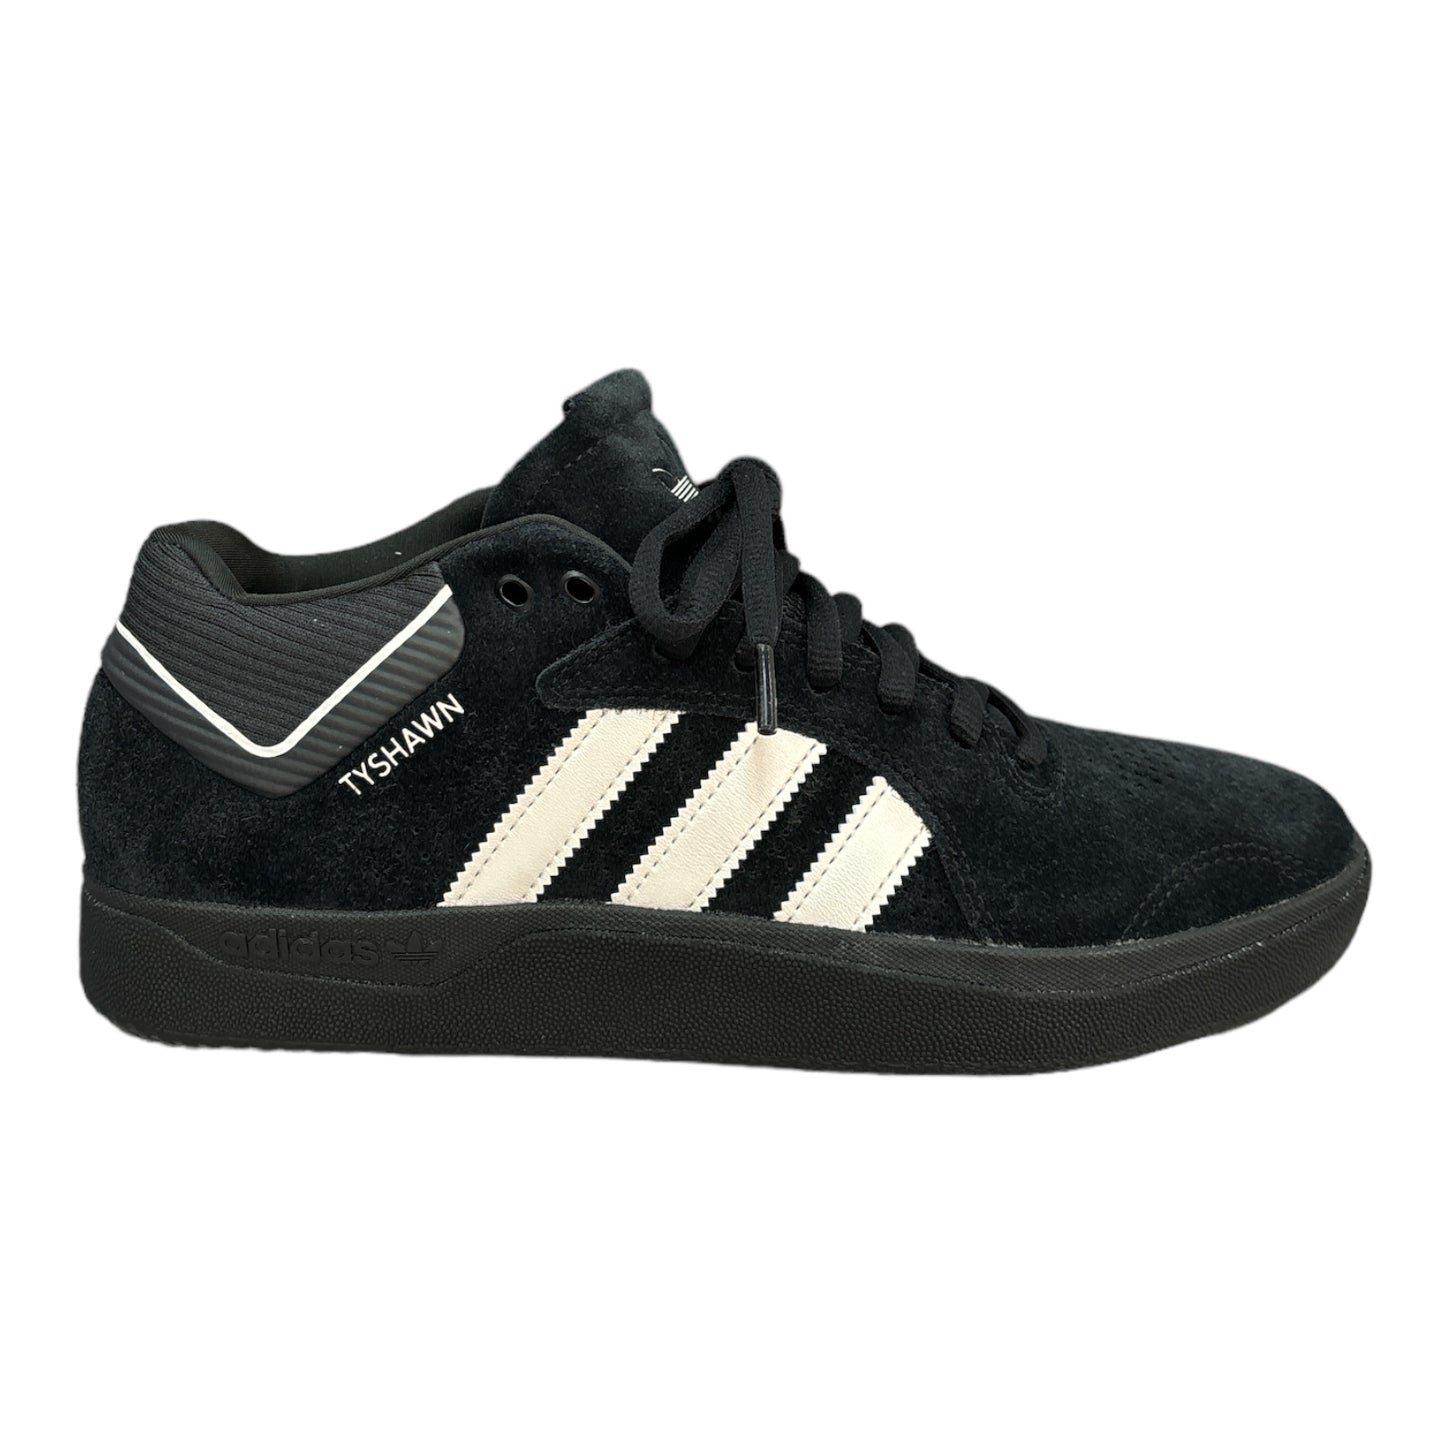 Adidas Tyshawn Mid in All Black Suede with Black Outsole and White Stripes. 